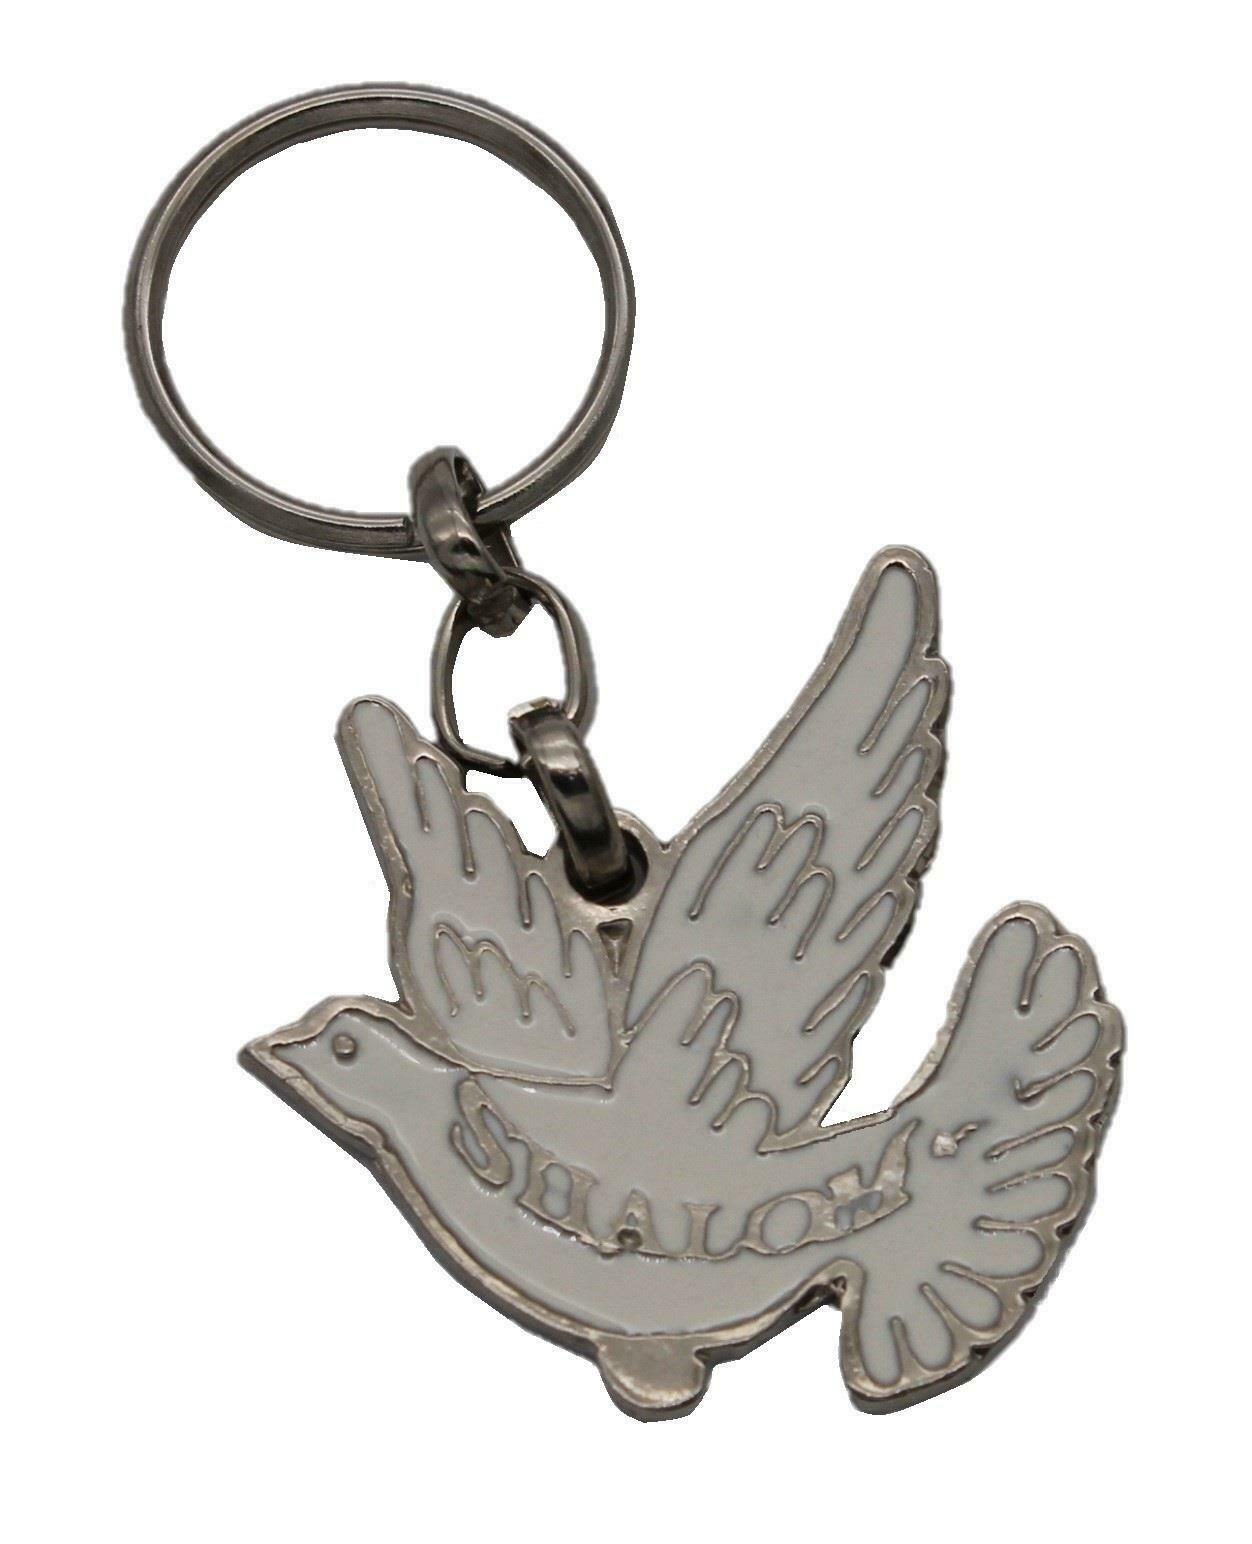 White Peace dove Metal Key Chain Judaism calm Amulet Holy Pendant Lucky Charm